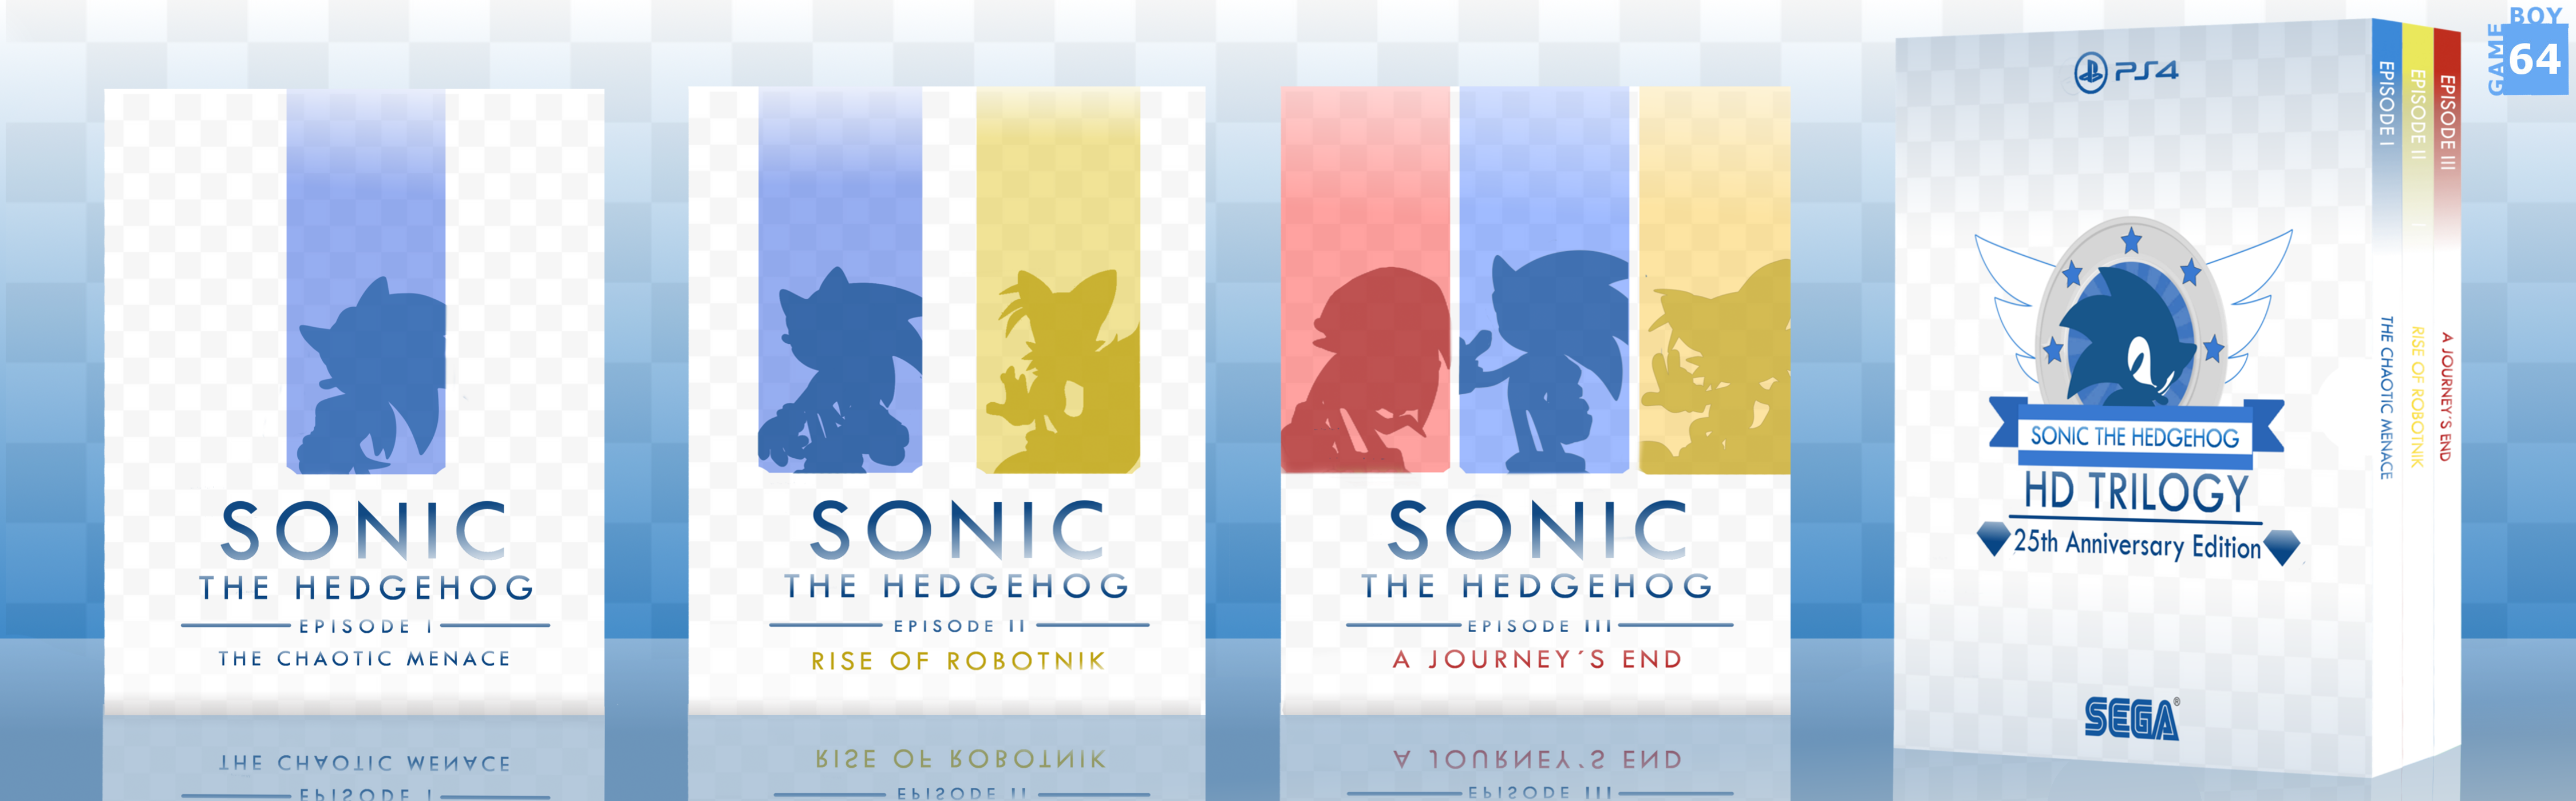 Sonic The Hedgehog: HD Trilogy box cover